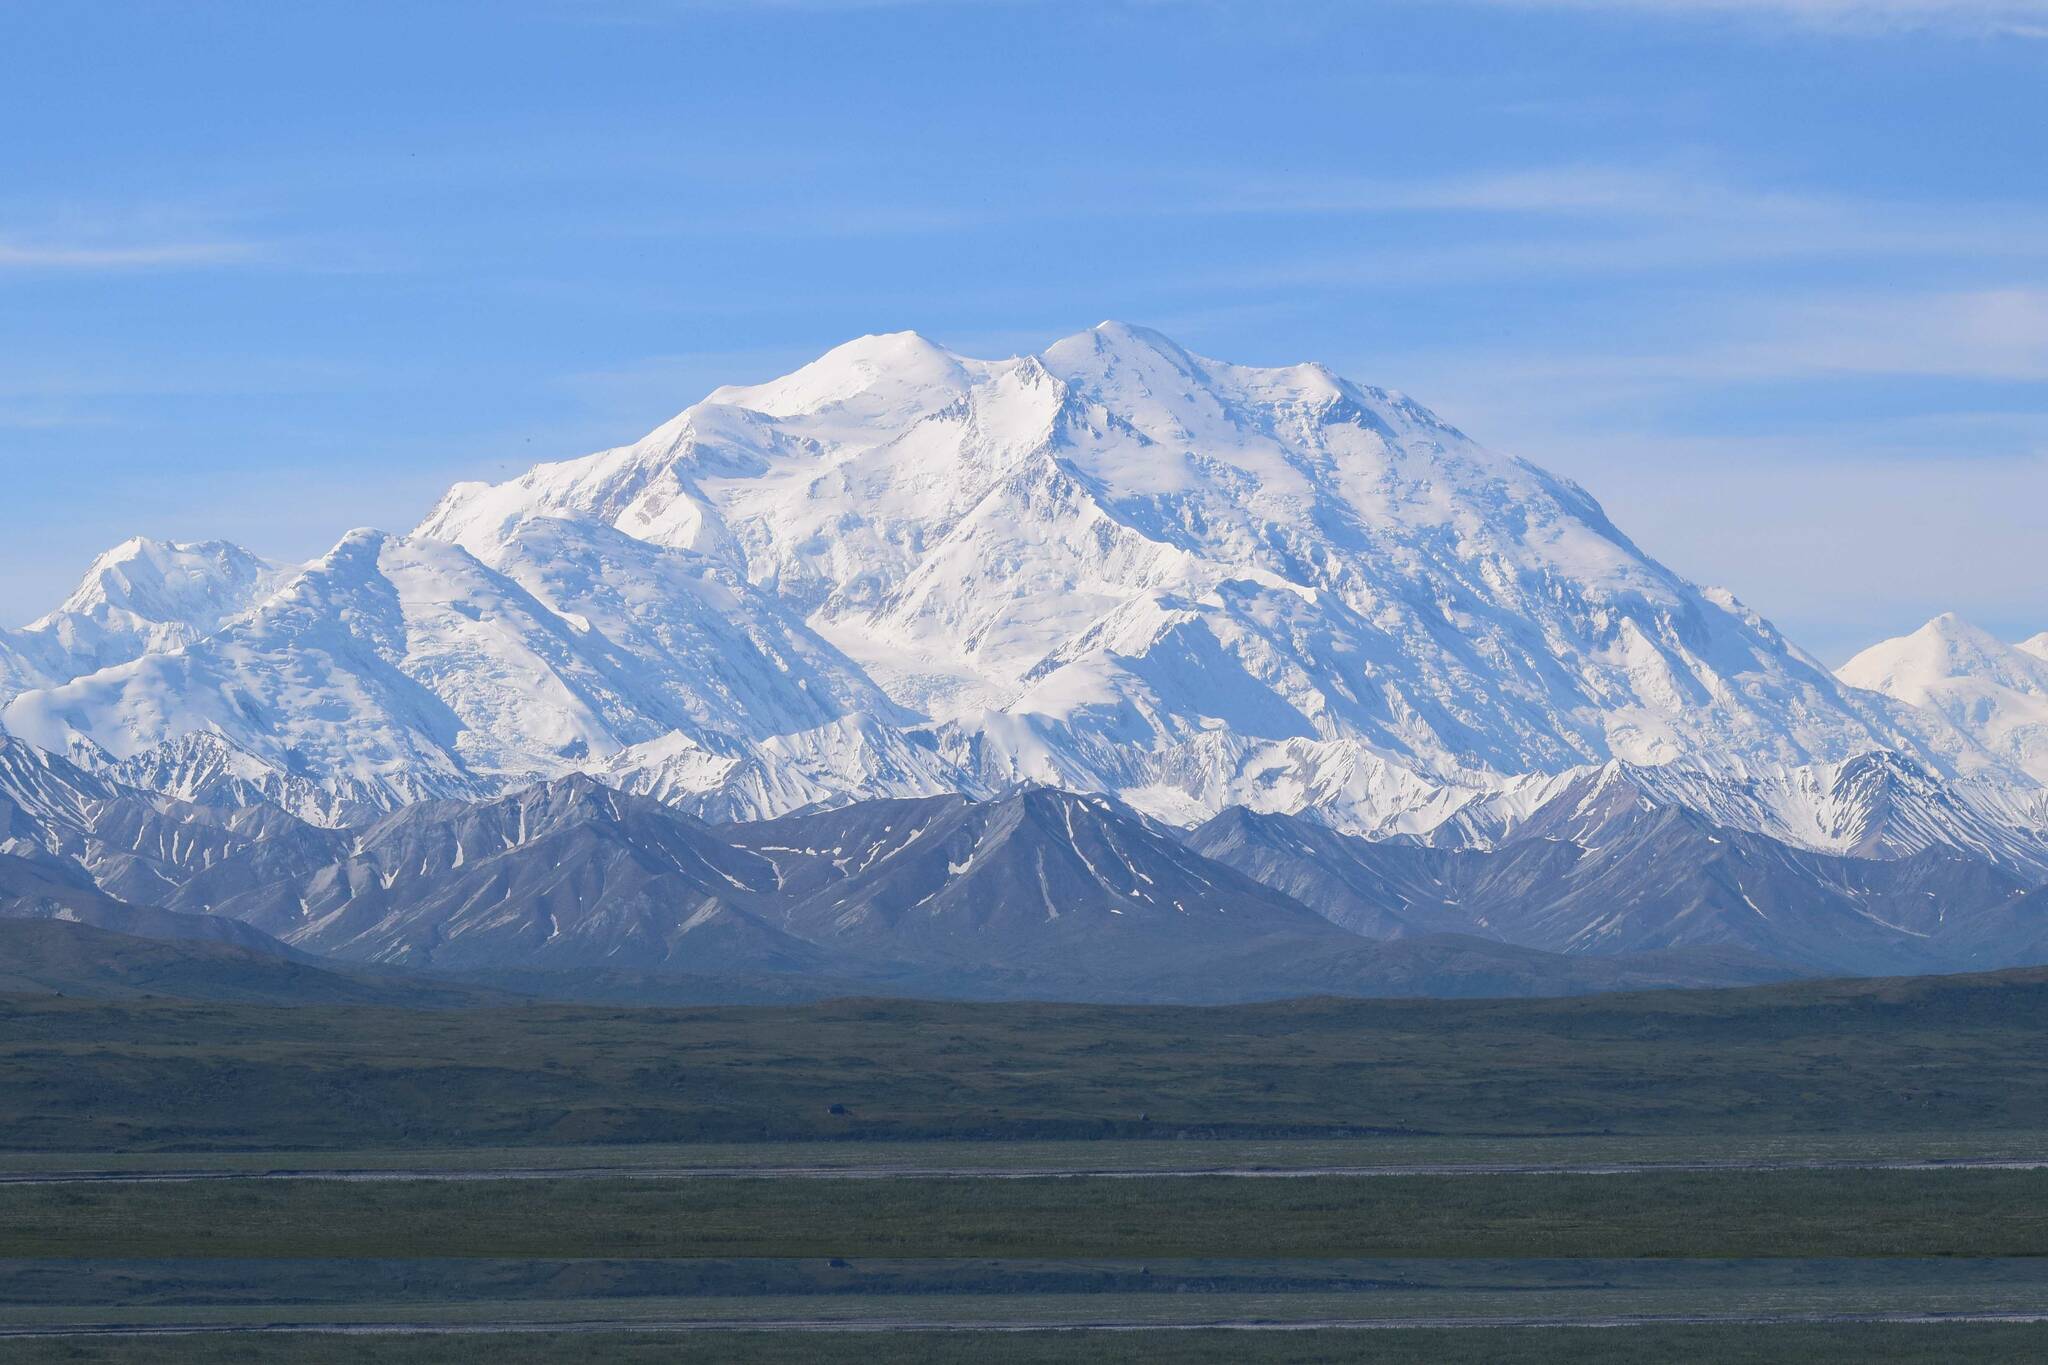 Denali today, whose height was first calculated by Bradford Washburn at 20,320 feet. (Photo by David Merz)